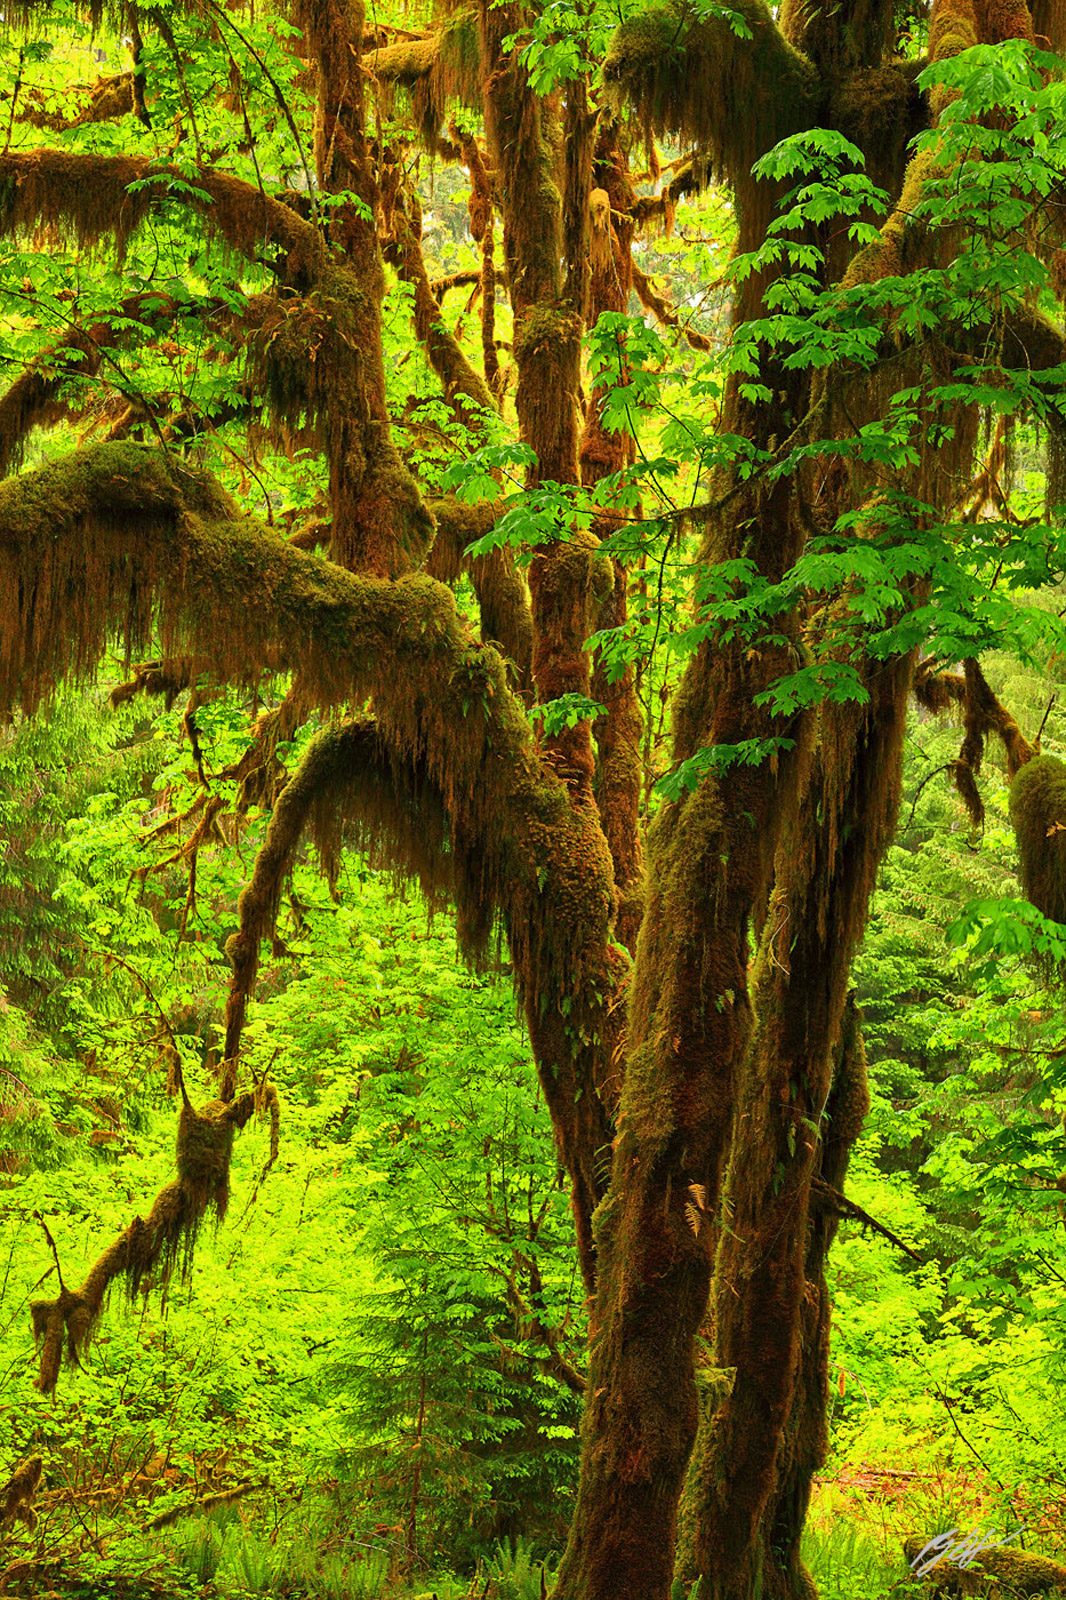 Giant Mossy Maple in the Hall of Mosses Trail in the Hoh Rainforest in Olympic National Park in Washington